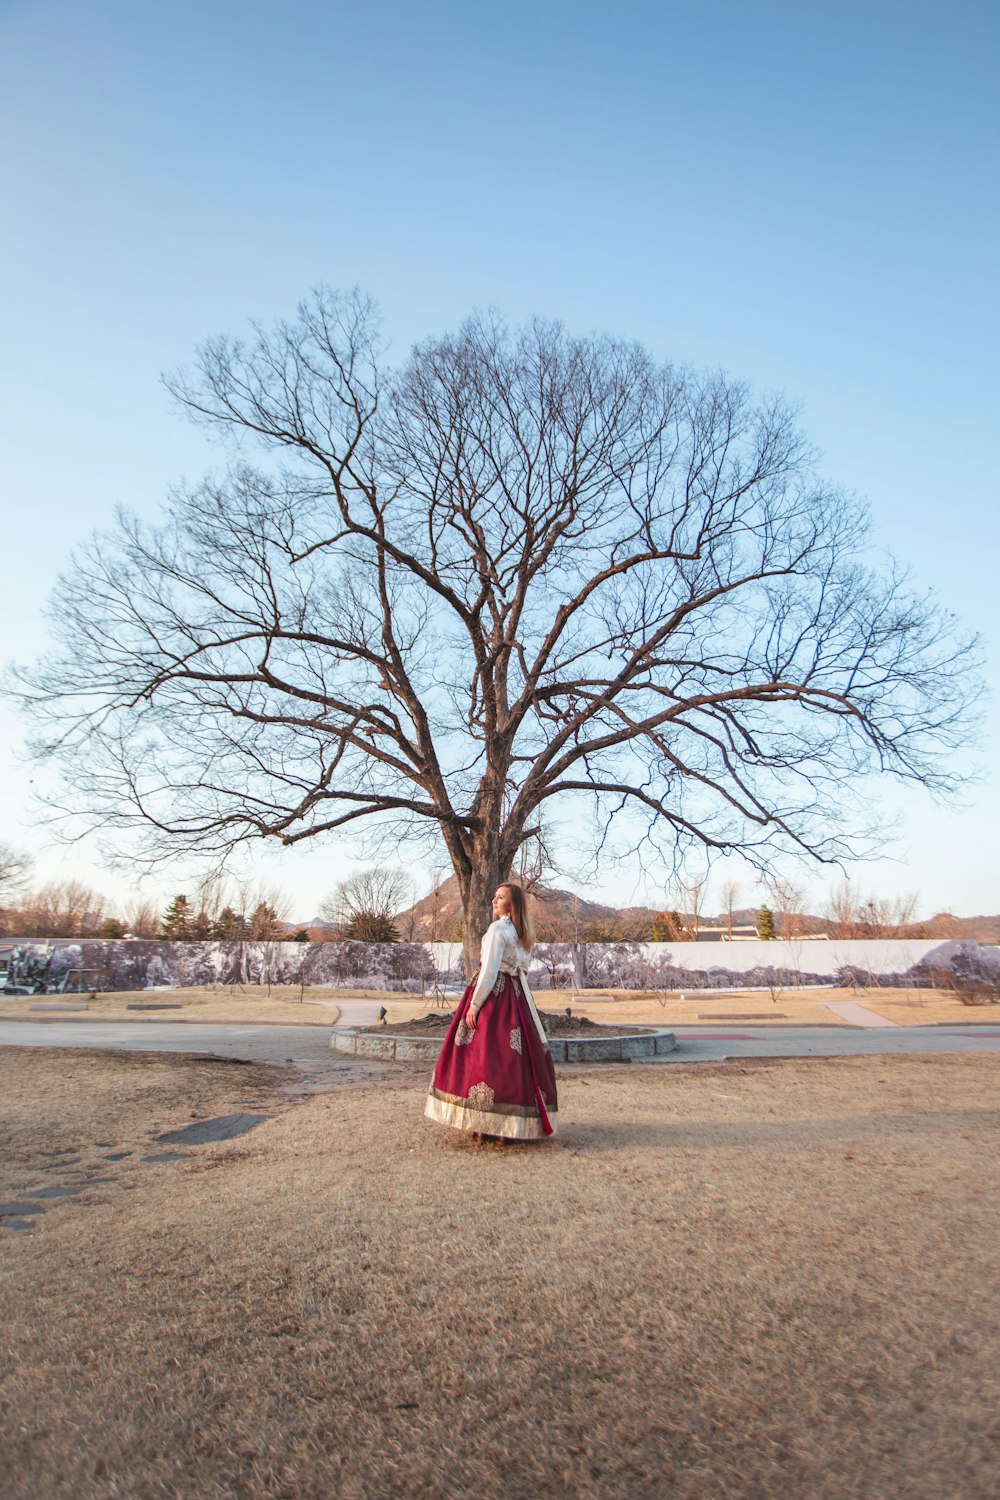 woman in red dress standing on brown dirt road near bare trees during daytime